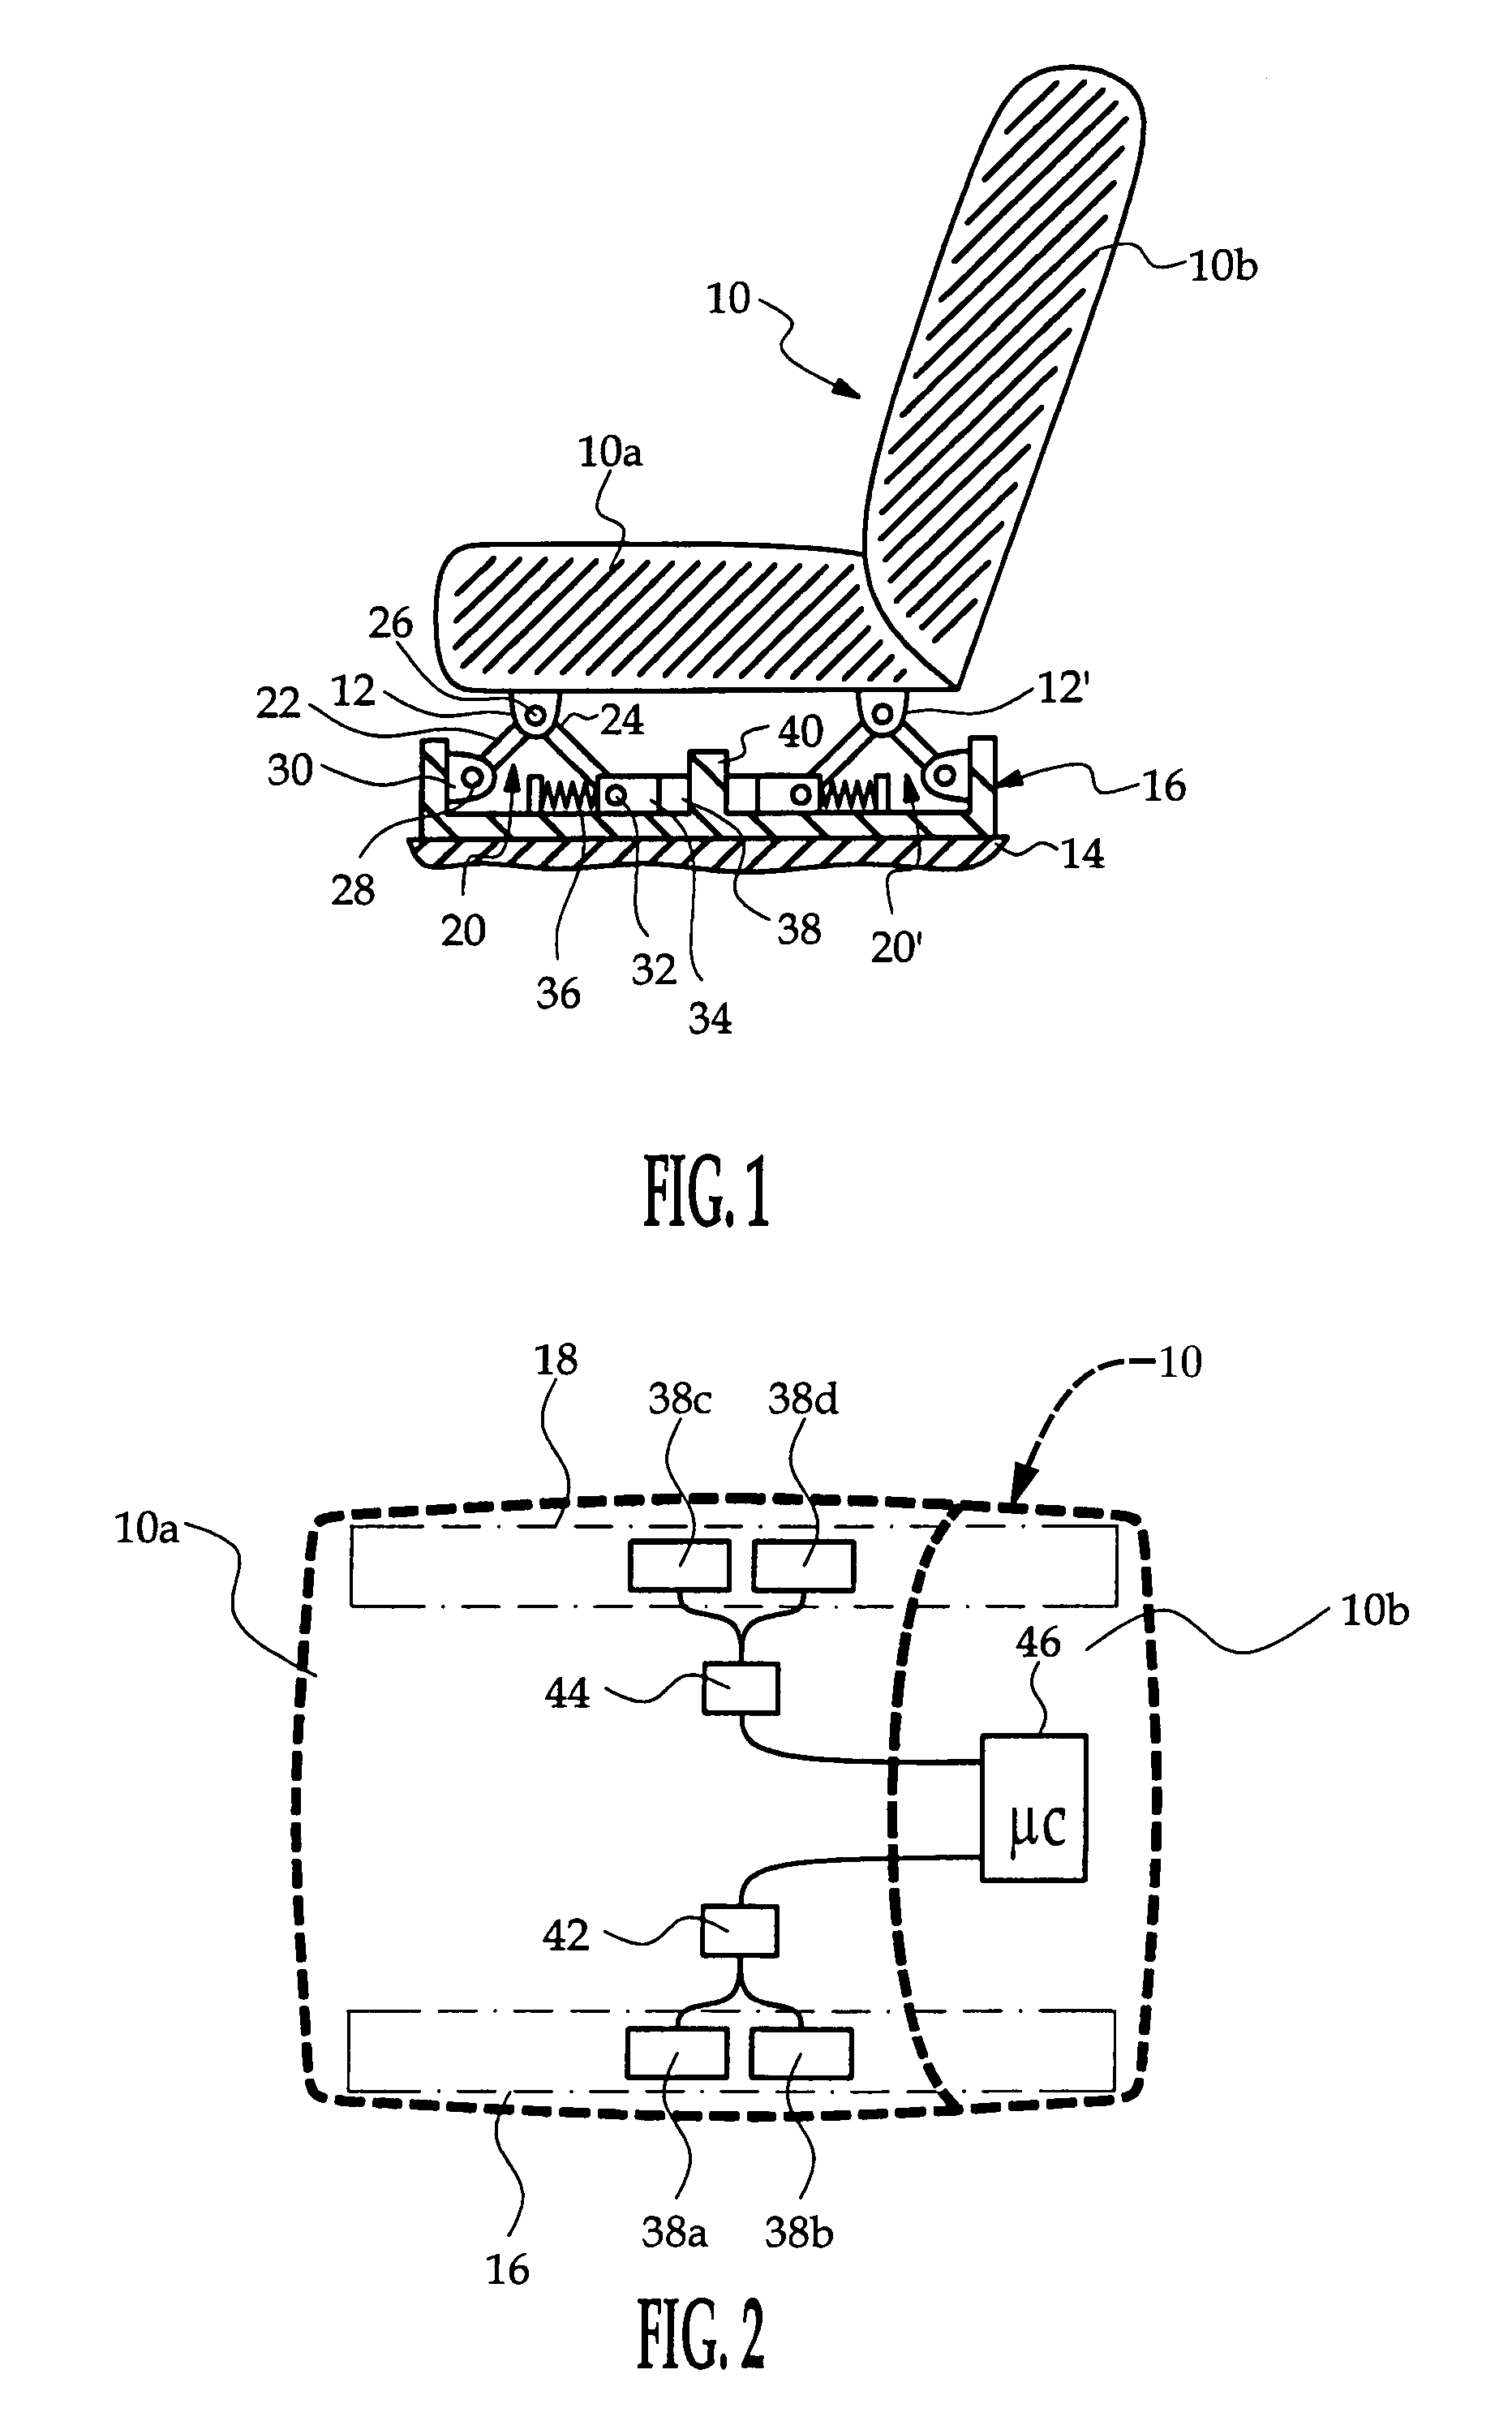 Frame-based occupant weight estimation apparatus having compliant linkage assembly